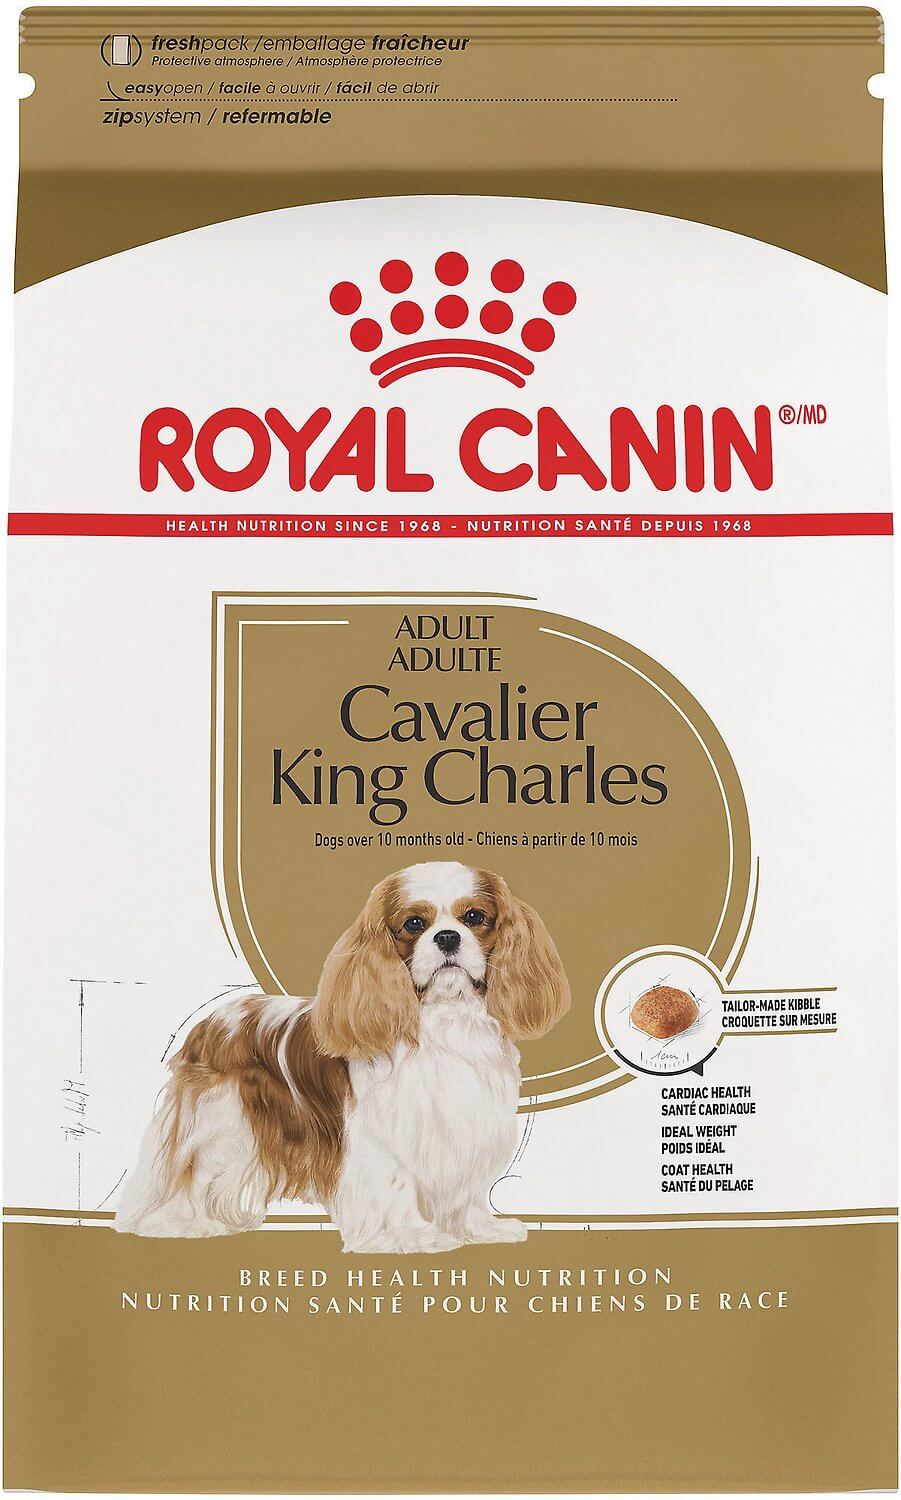 royal canin small breed puppy food